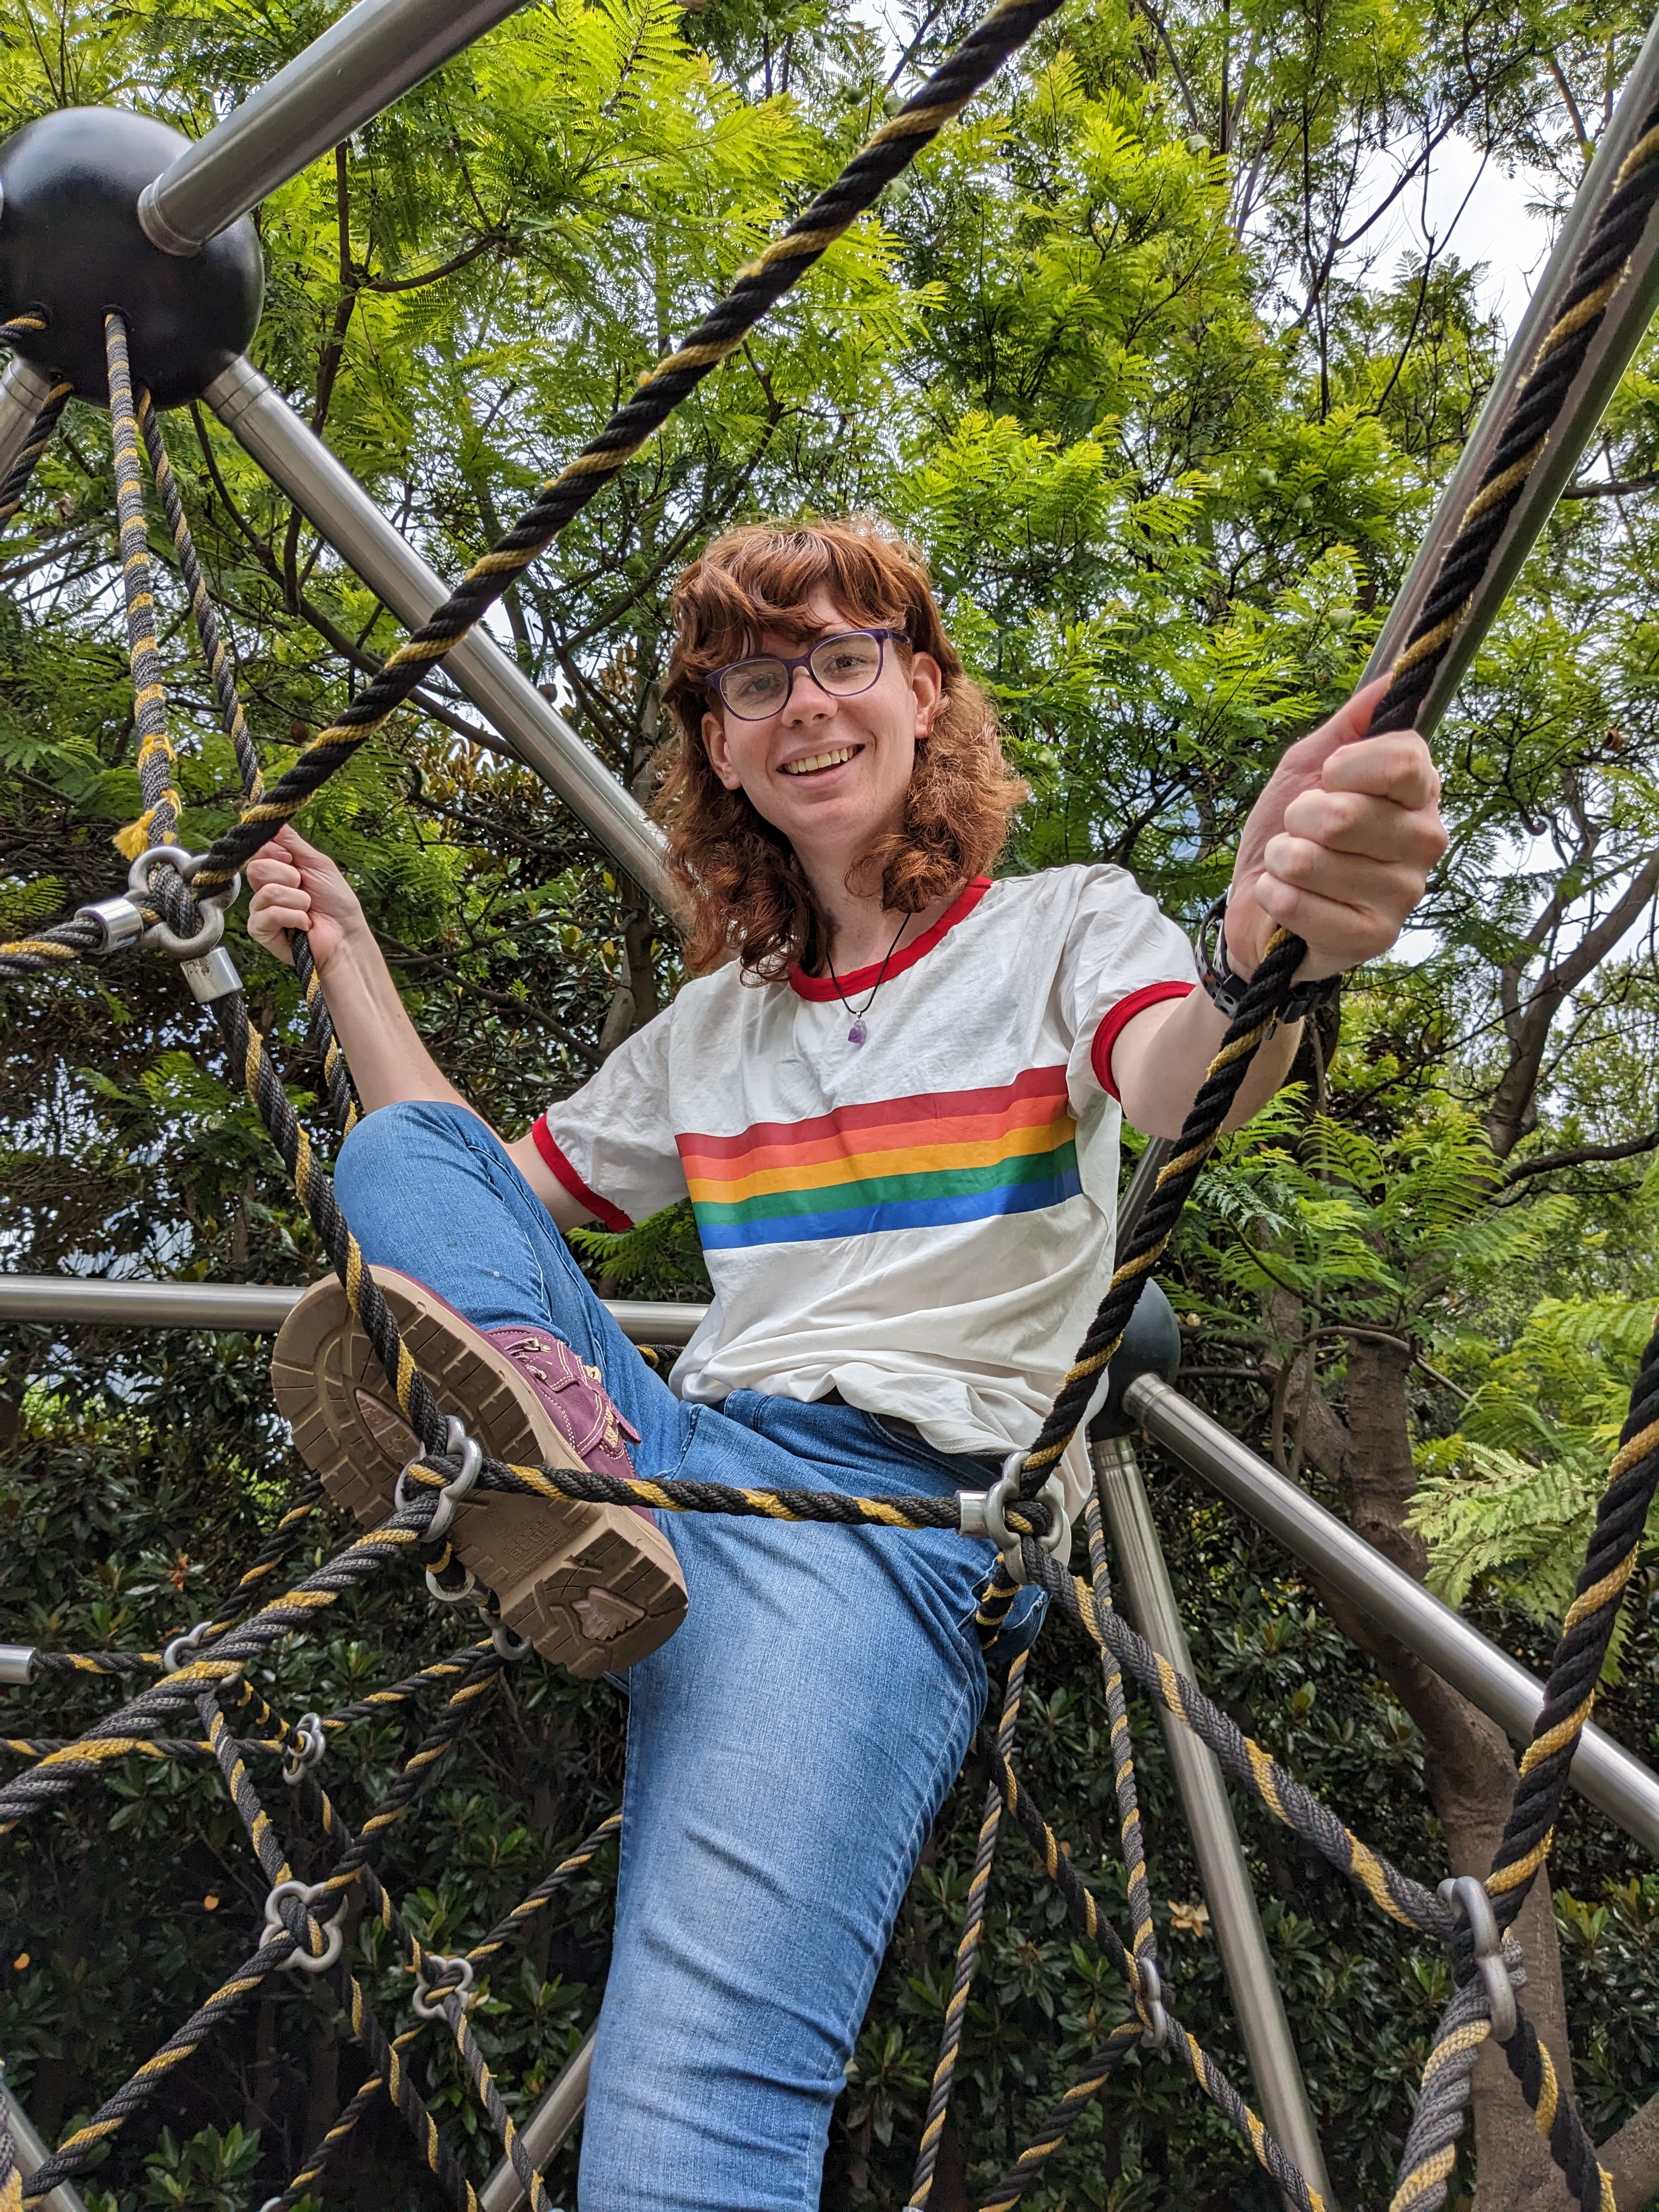 A young woman with red hair and a white shirt with a rainbow on it smiles down at the camera from on top of some playground equipment